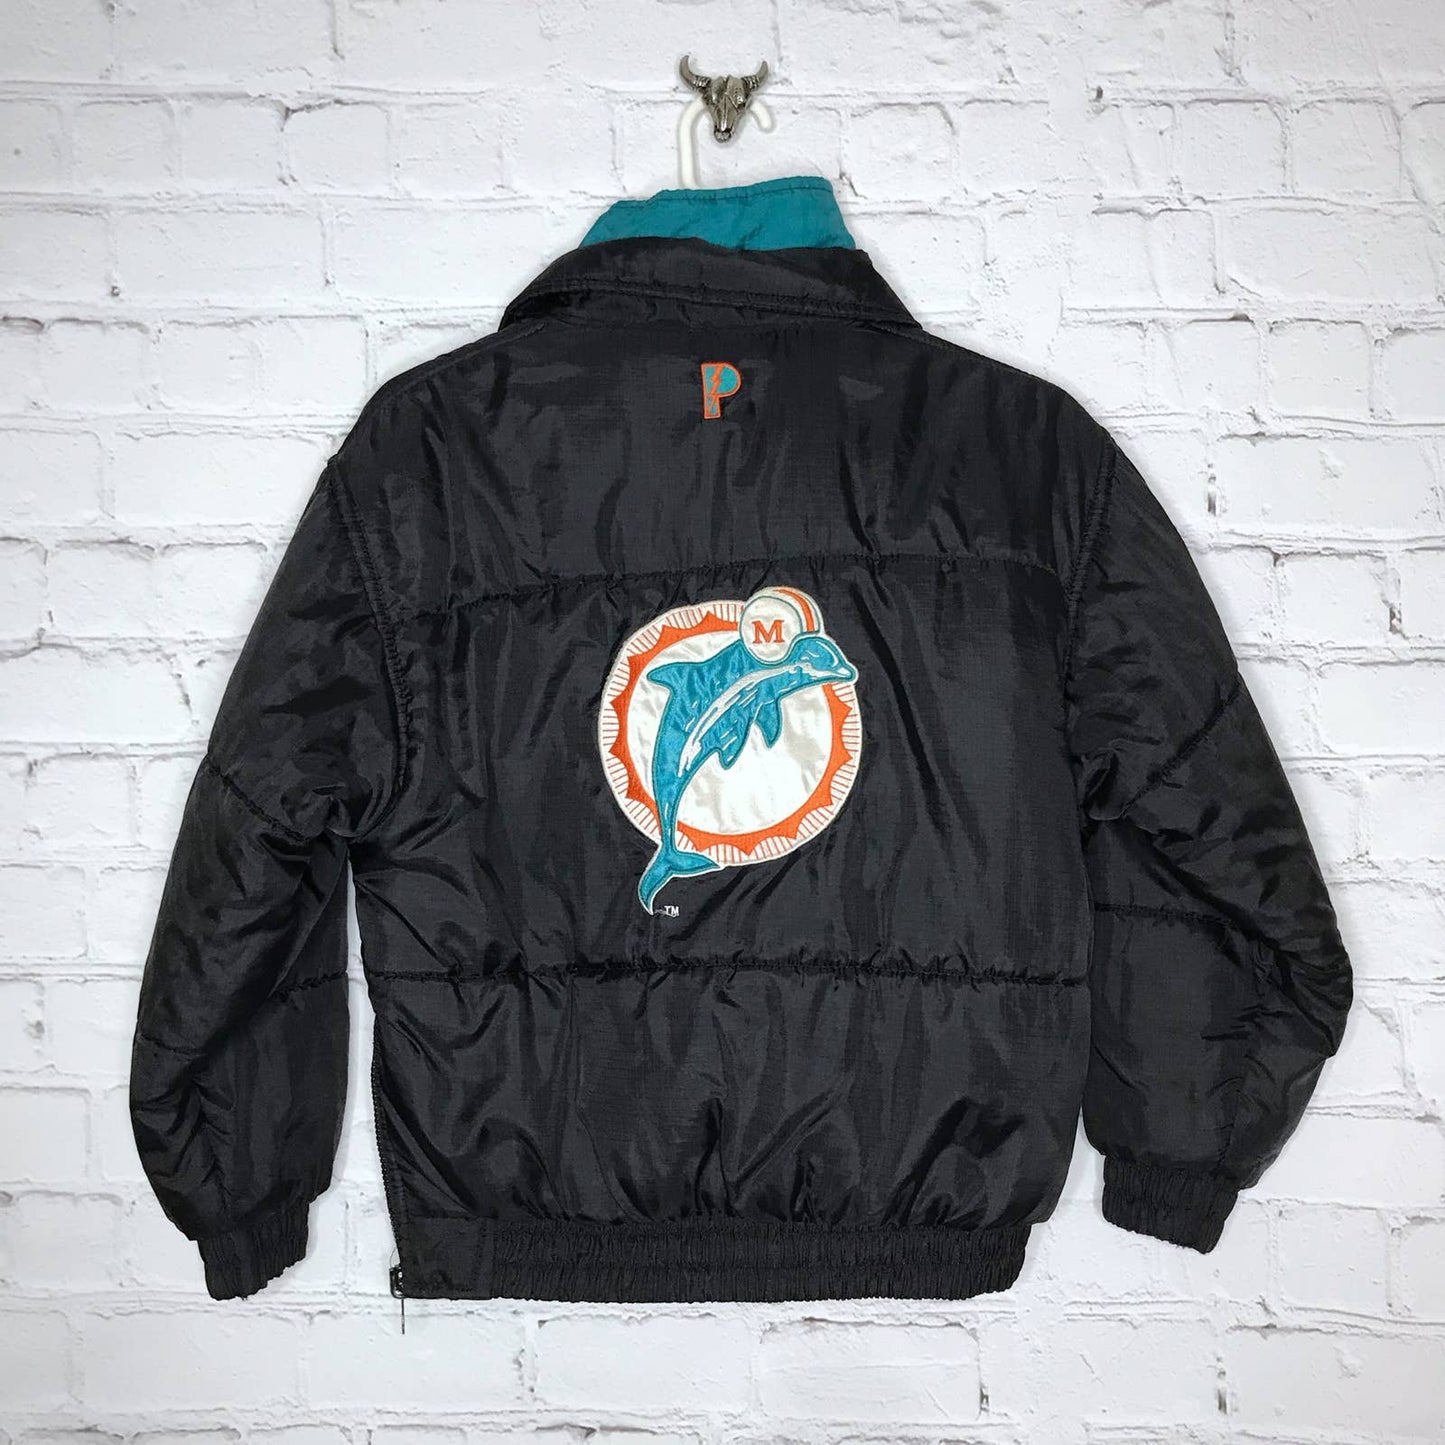 Vintage 90s Youth Reversible ProPlayer Puffer Coat Miami Dolphins NFL Football